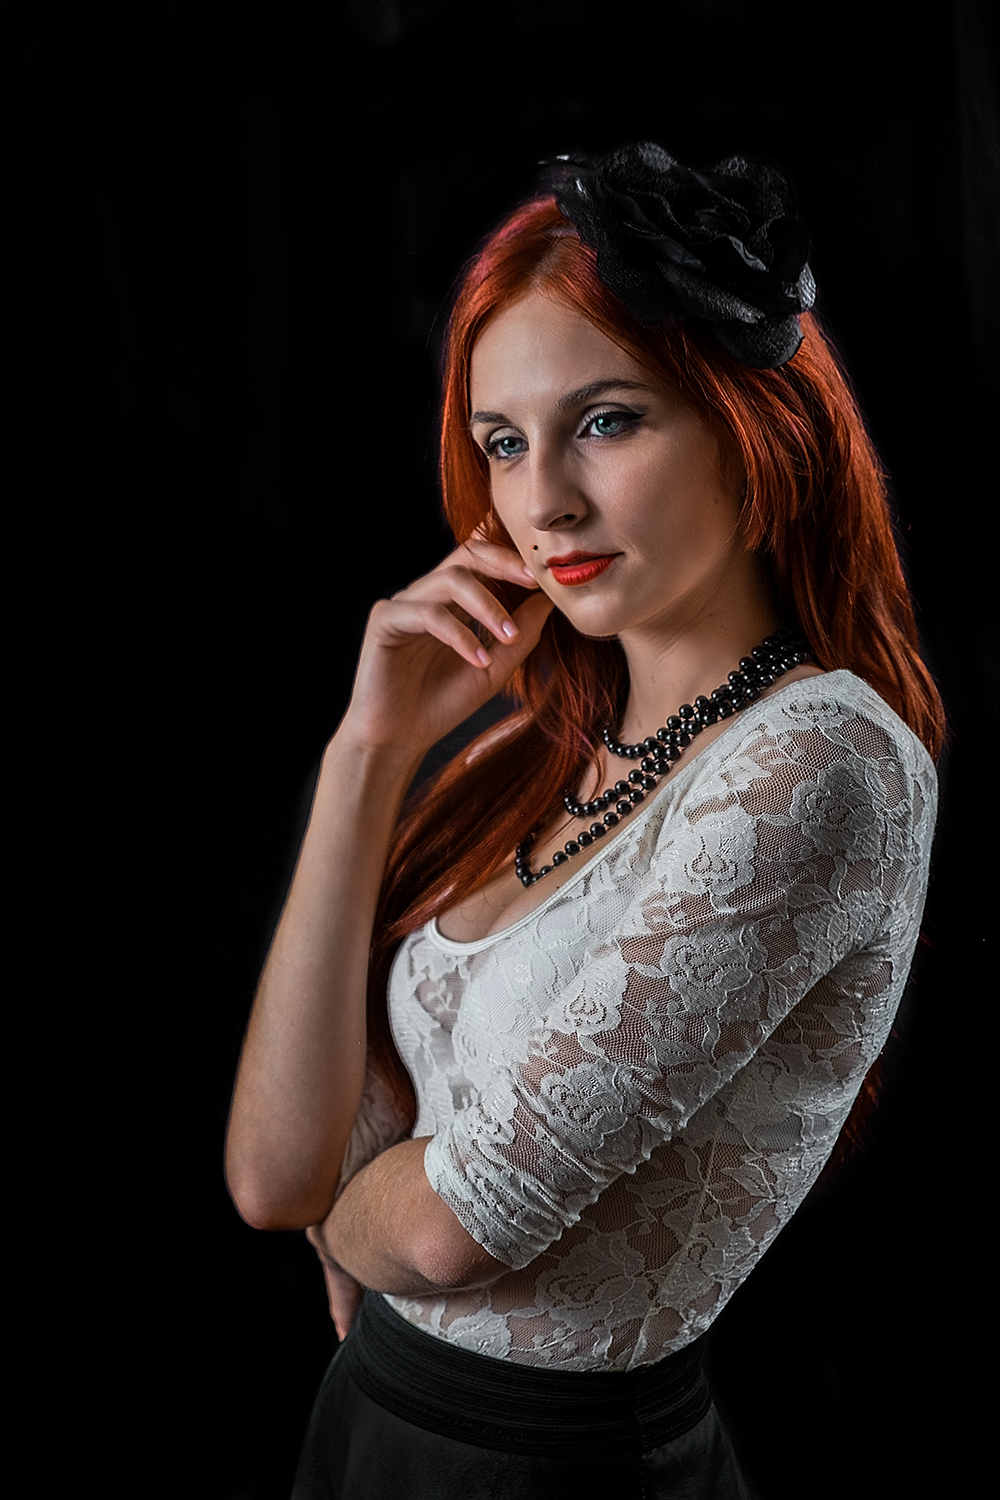 portrait, portraits, ritratto, ritratti, woman, girl, red hair, beautiful, awesome, cute, gorgeous, 